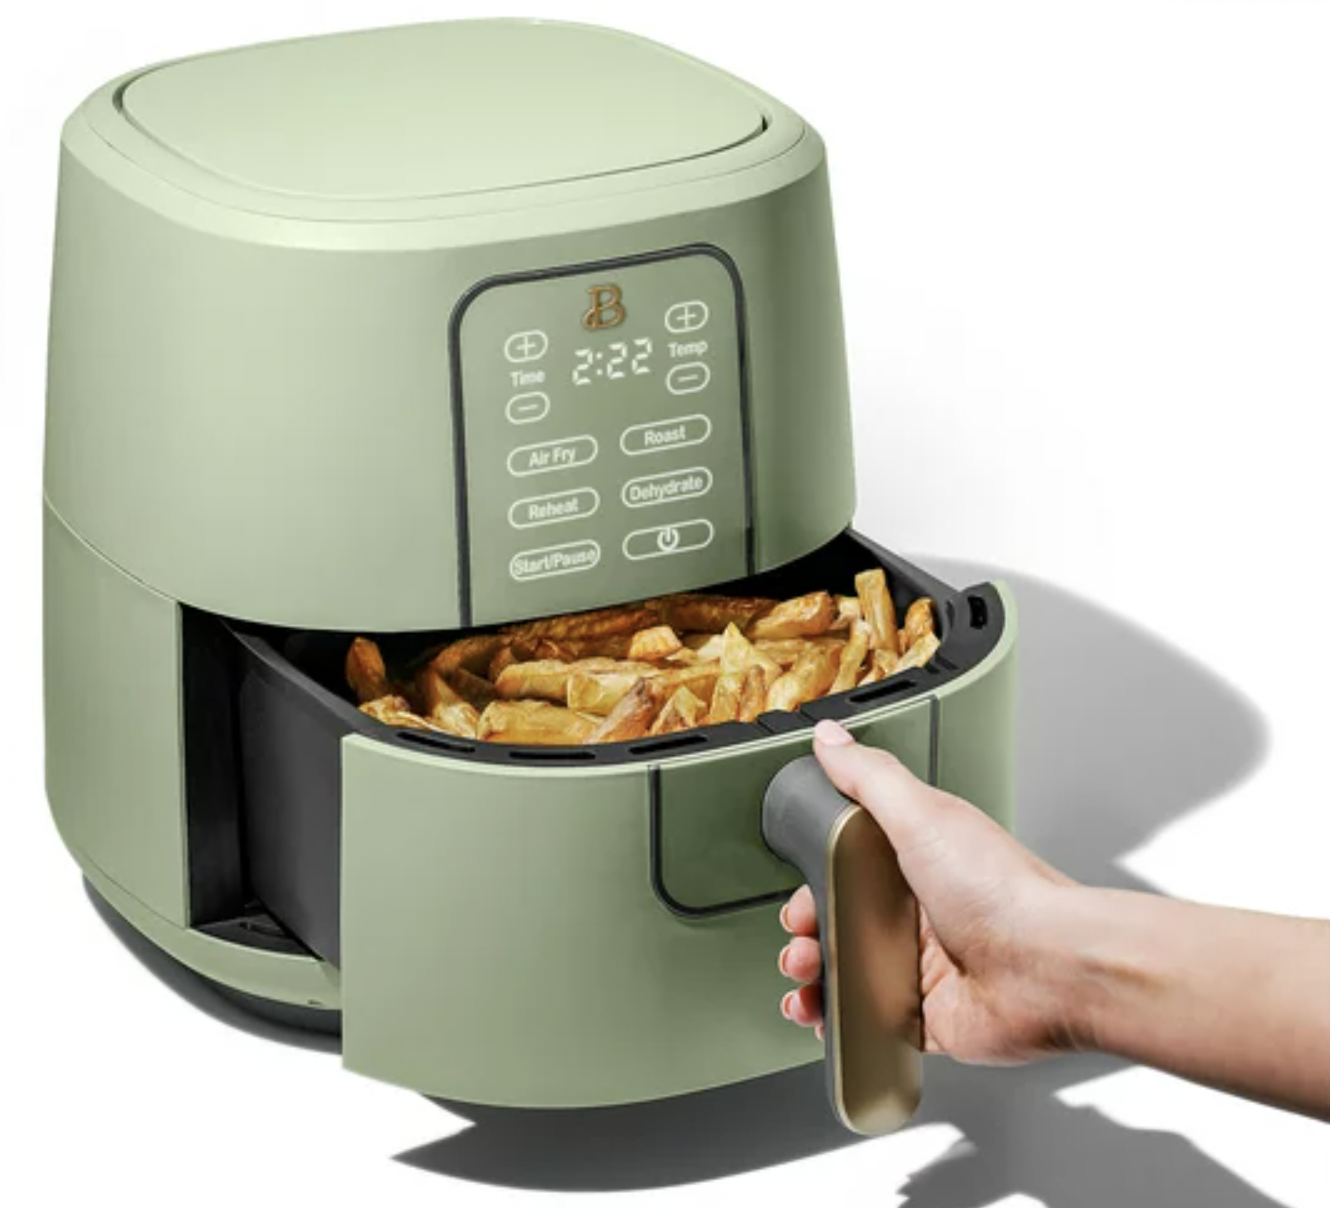 https://thekrazycouponlady.com/wp-content/uploads/2022/08/beautiful-by-drew-barrymore-sage-green-air-fryer-kitchen-appliance-walmart-exclusive-product-image-screenshot-2022-1659461394-1659461394.png